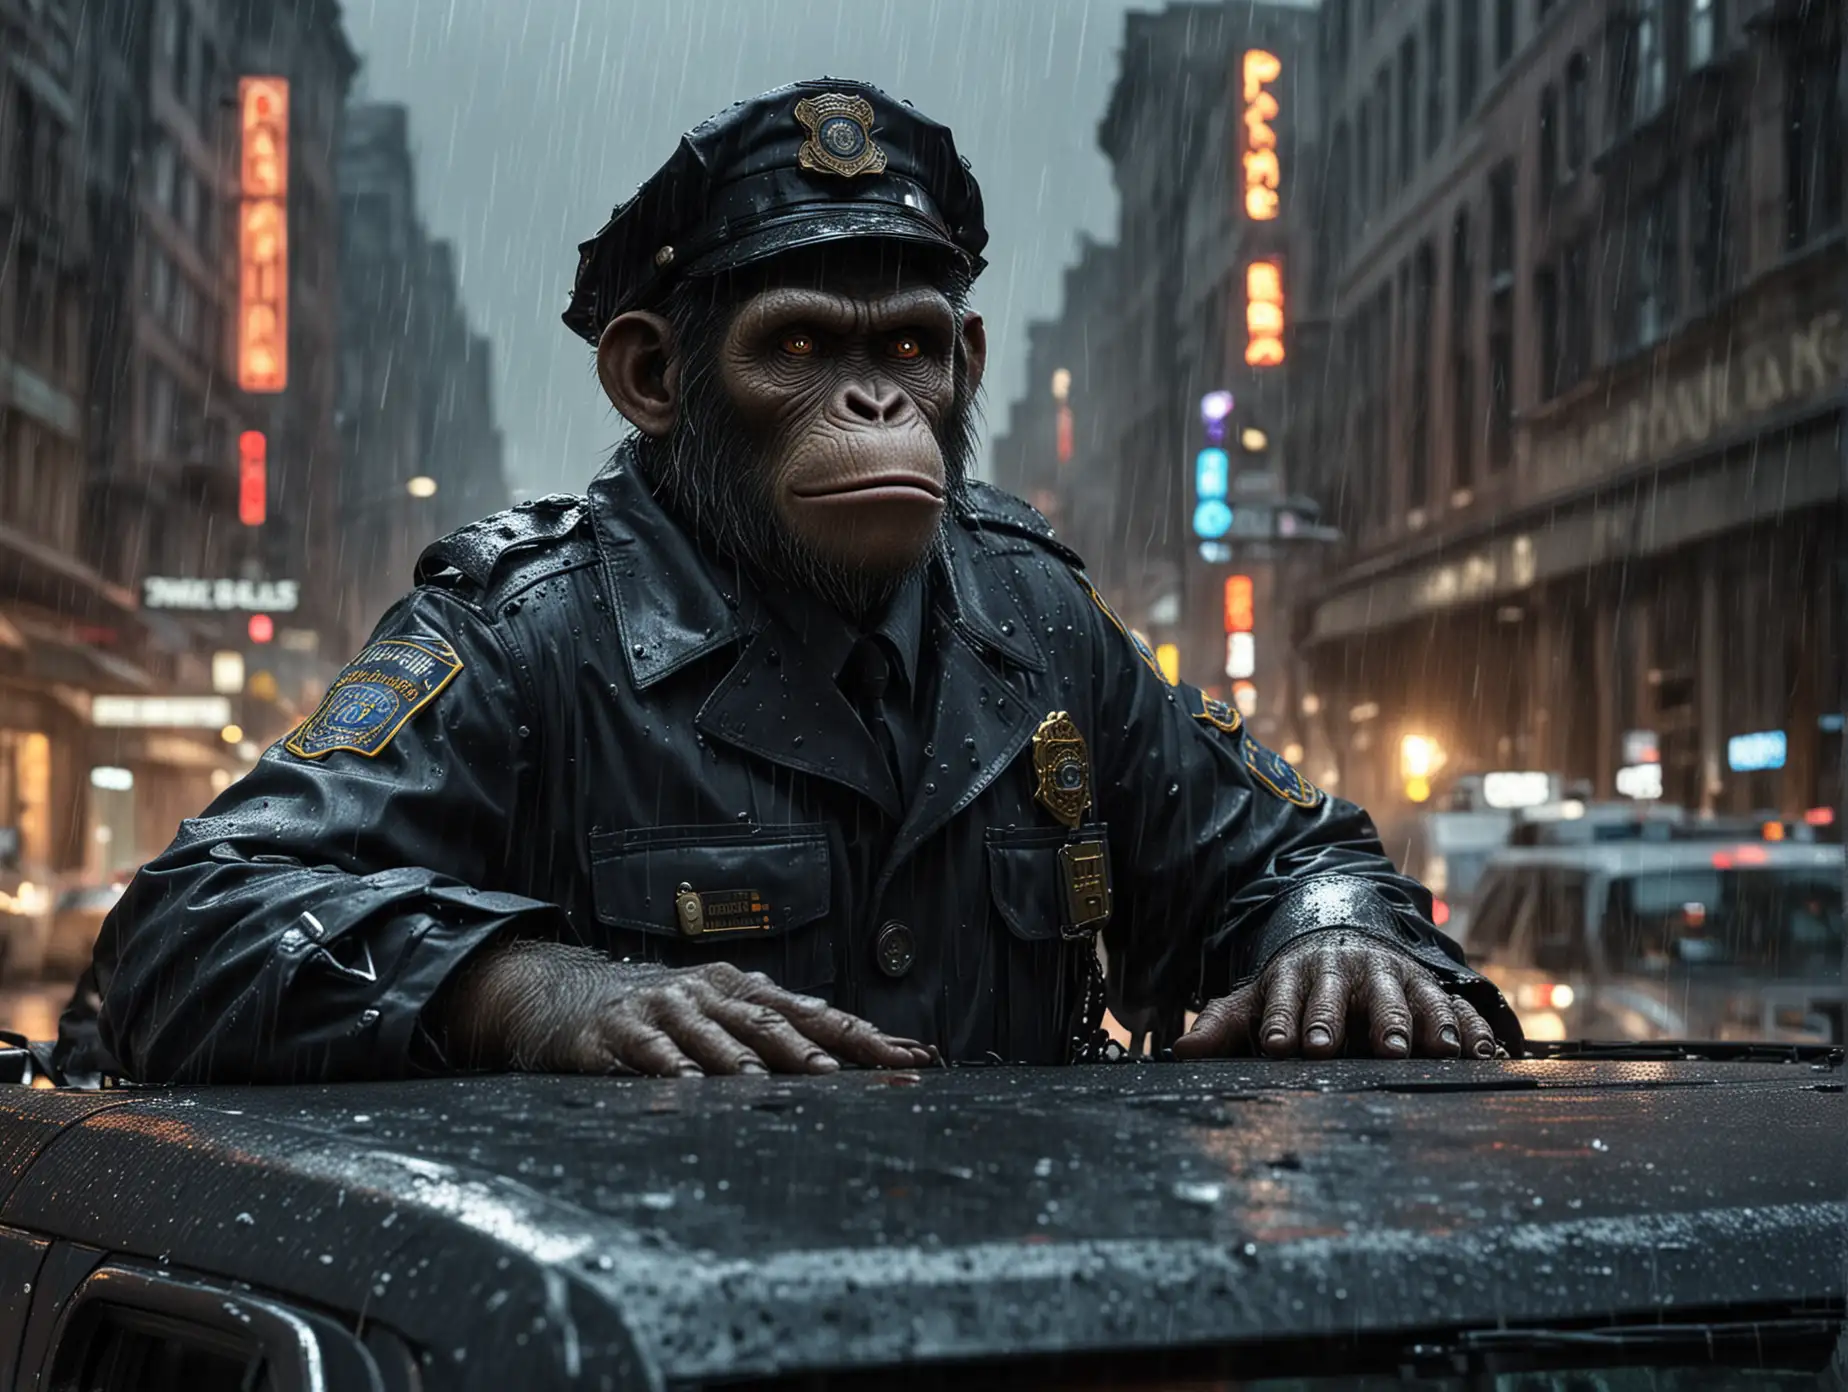 "Imagine a scene set in Gotham City, featuring a humanoid ape police officer amidst the nocturnal urban landscape. Dressed in a standard police uniform, complete with a weathered trench coat and a police cap, the humanoid ape exudes authority and determination. With an earpiece for radio communication in place, the ape officer sits inside a police car, rain droplets trickling down the windshield. Against the backdrop of Gotham's rain-soaked streets, illuminated by neon lights, the humanoid ape police officer's keen eyes scan the surroundings, ready to respond to any call or chase down criminals lurking in the shadows."